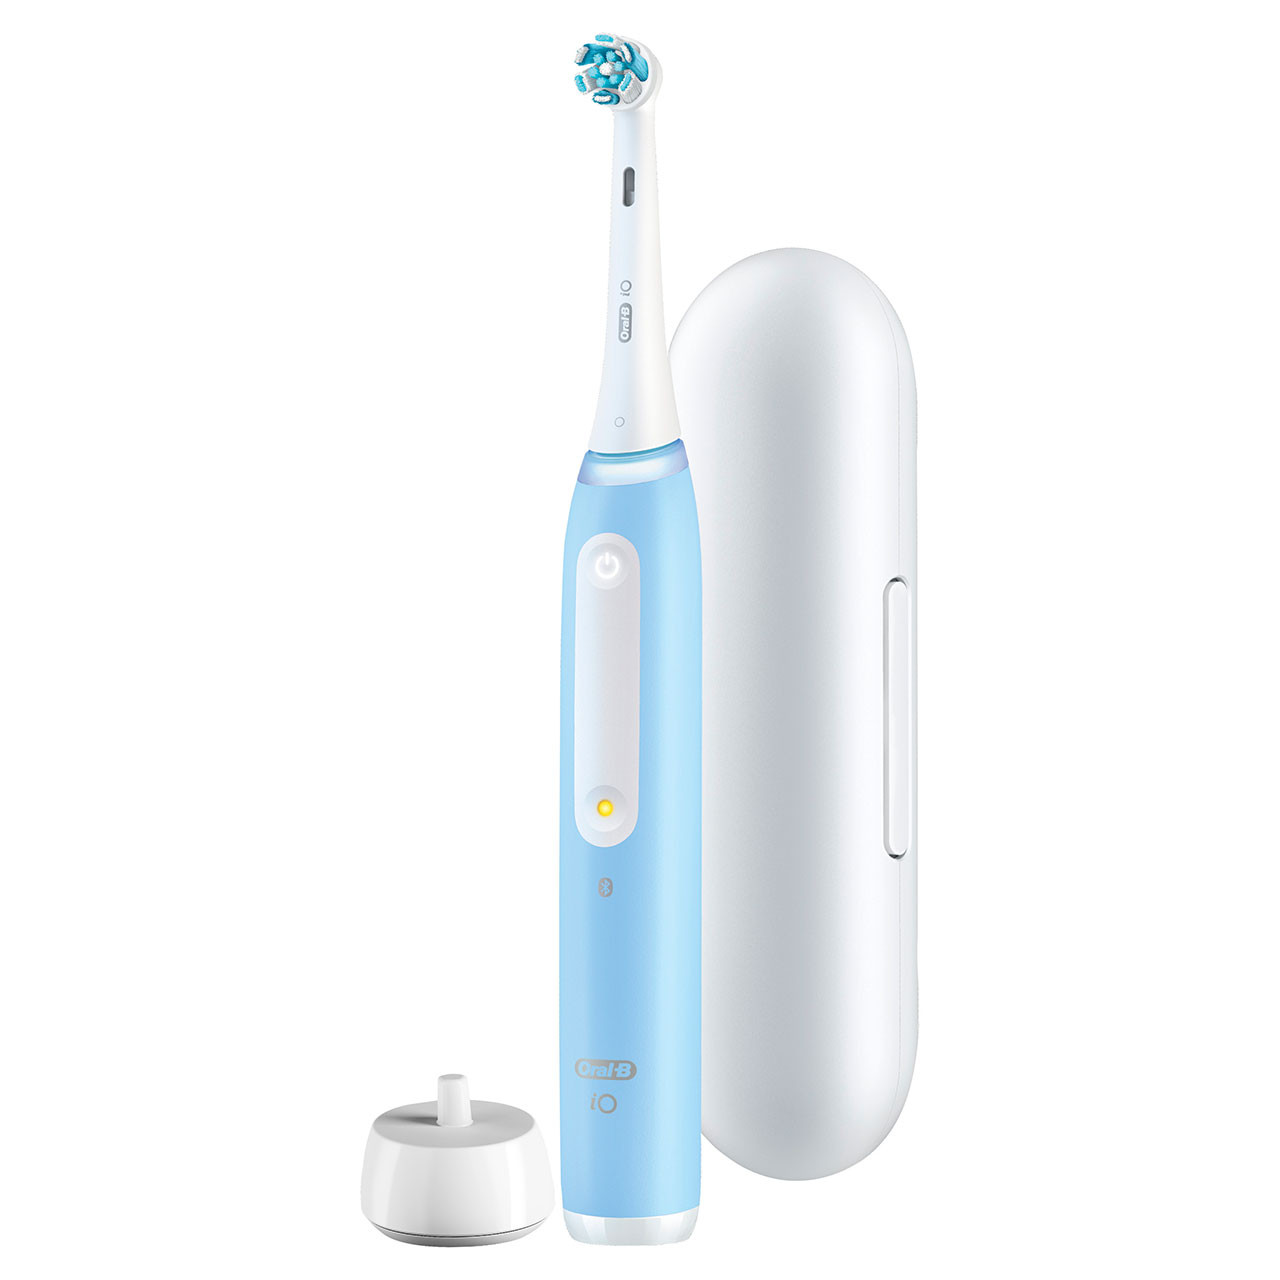 Toothbrush stand/holder for Braun Oral B for 5, 4, 3, 2, 1 electric  toothbrushes